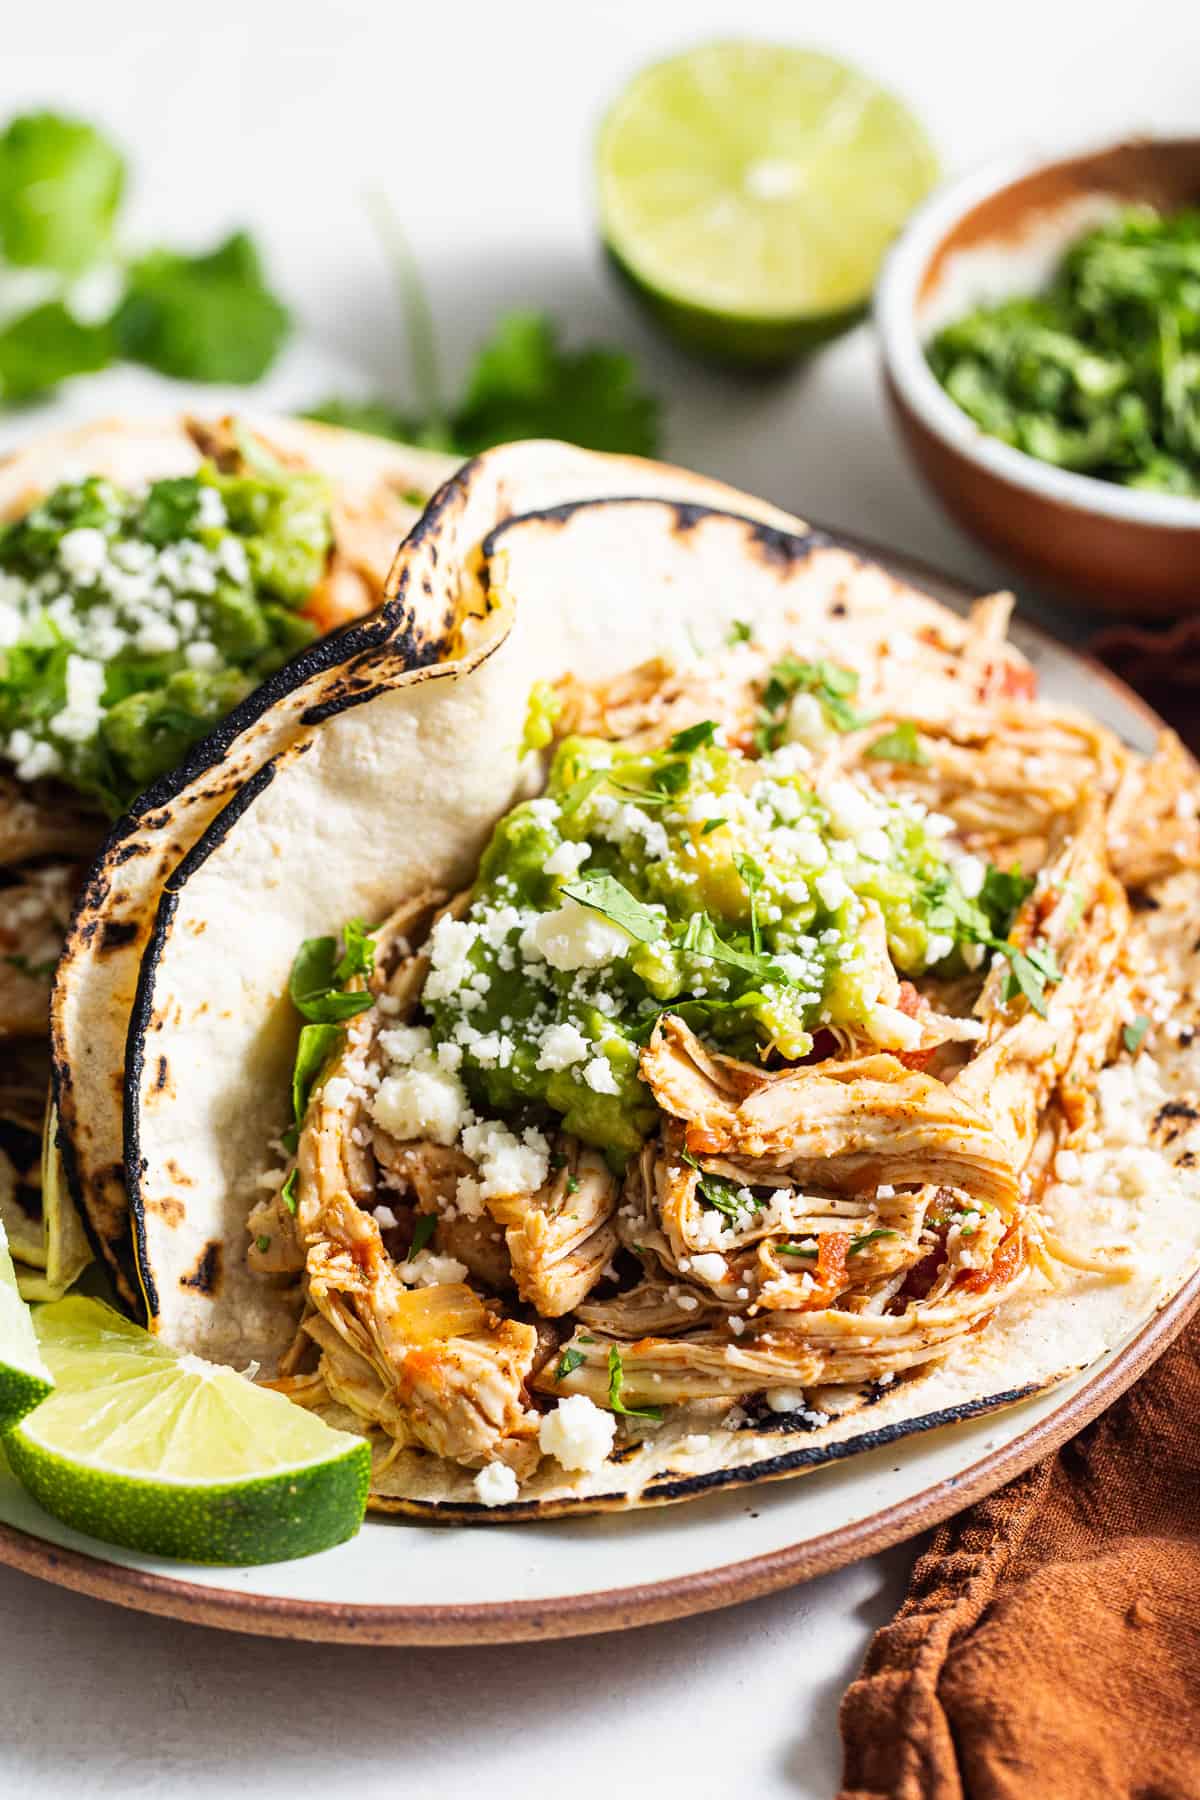 Crockpot chicken tacos served with guacamole and cotija cheese.